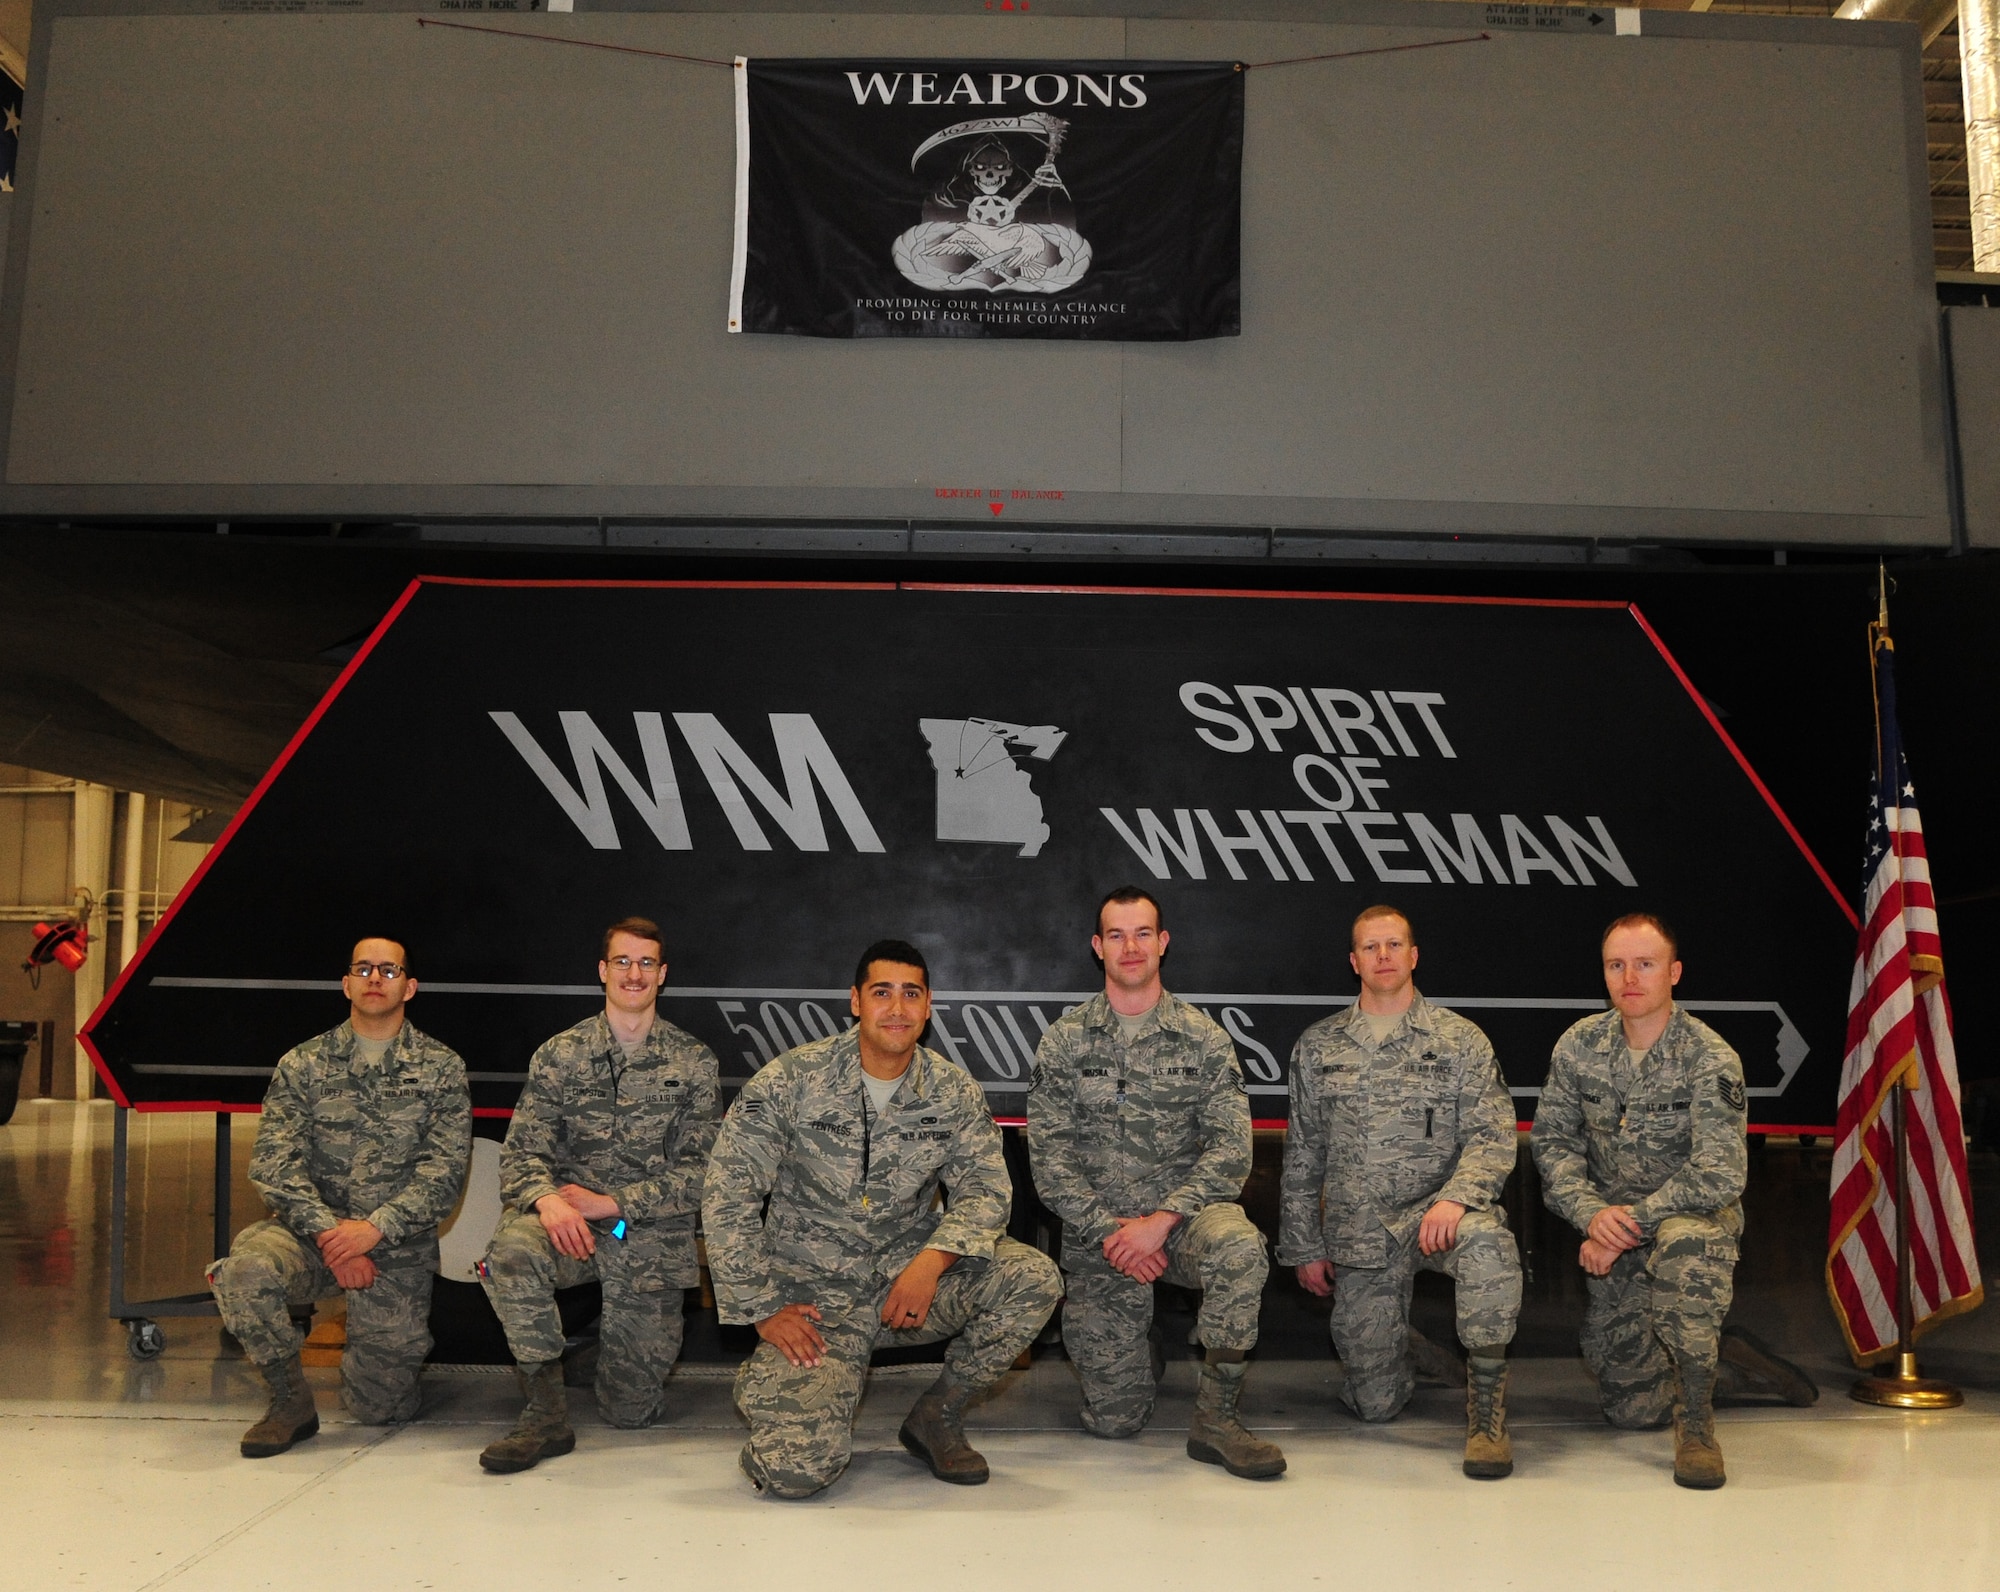 Aircraft armament systems technicians from the 509th and 131st Aircraft Maintenance Squadron pose for a group photo at Whiteman Air Force Base, Mo., April 14, 2016. During exercise CONSTANT VIGILANCE 16 (CV16), drill-status guardsmen (DSG) had the opportunity to work alongside their full-time counterparts, which marked the first time DSG have participated in the actual loading of weapons during an exercise. (U.S. Air Force photo by Airman 1st Class Keenan Berry)